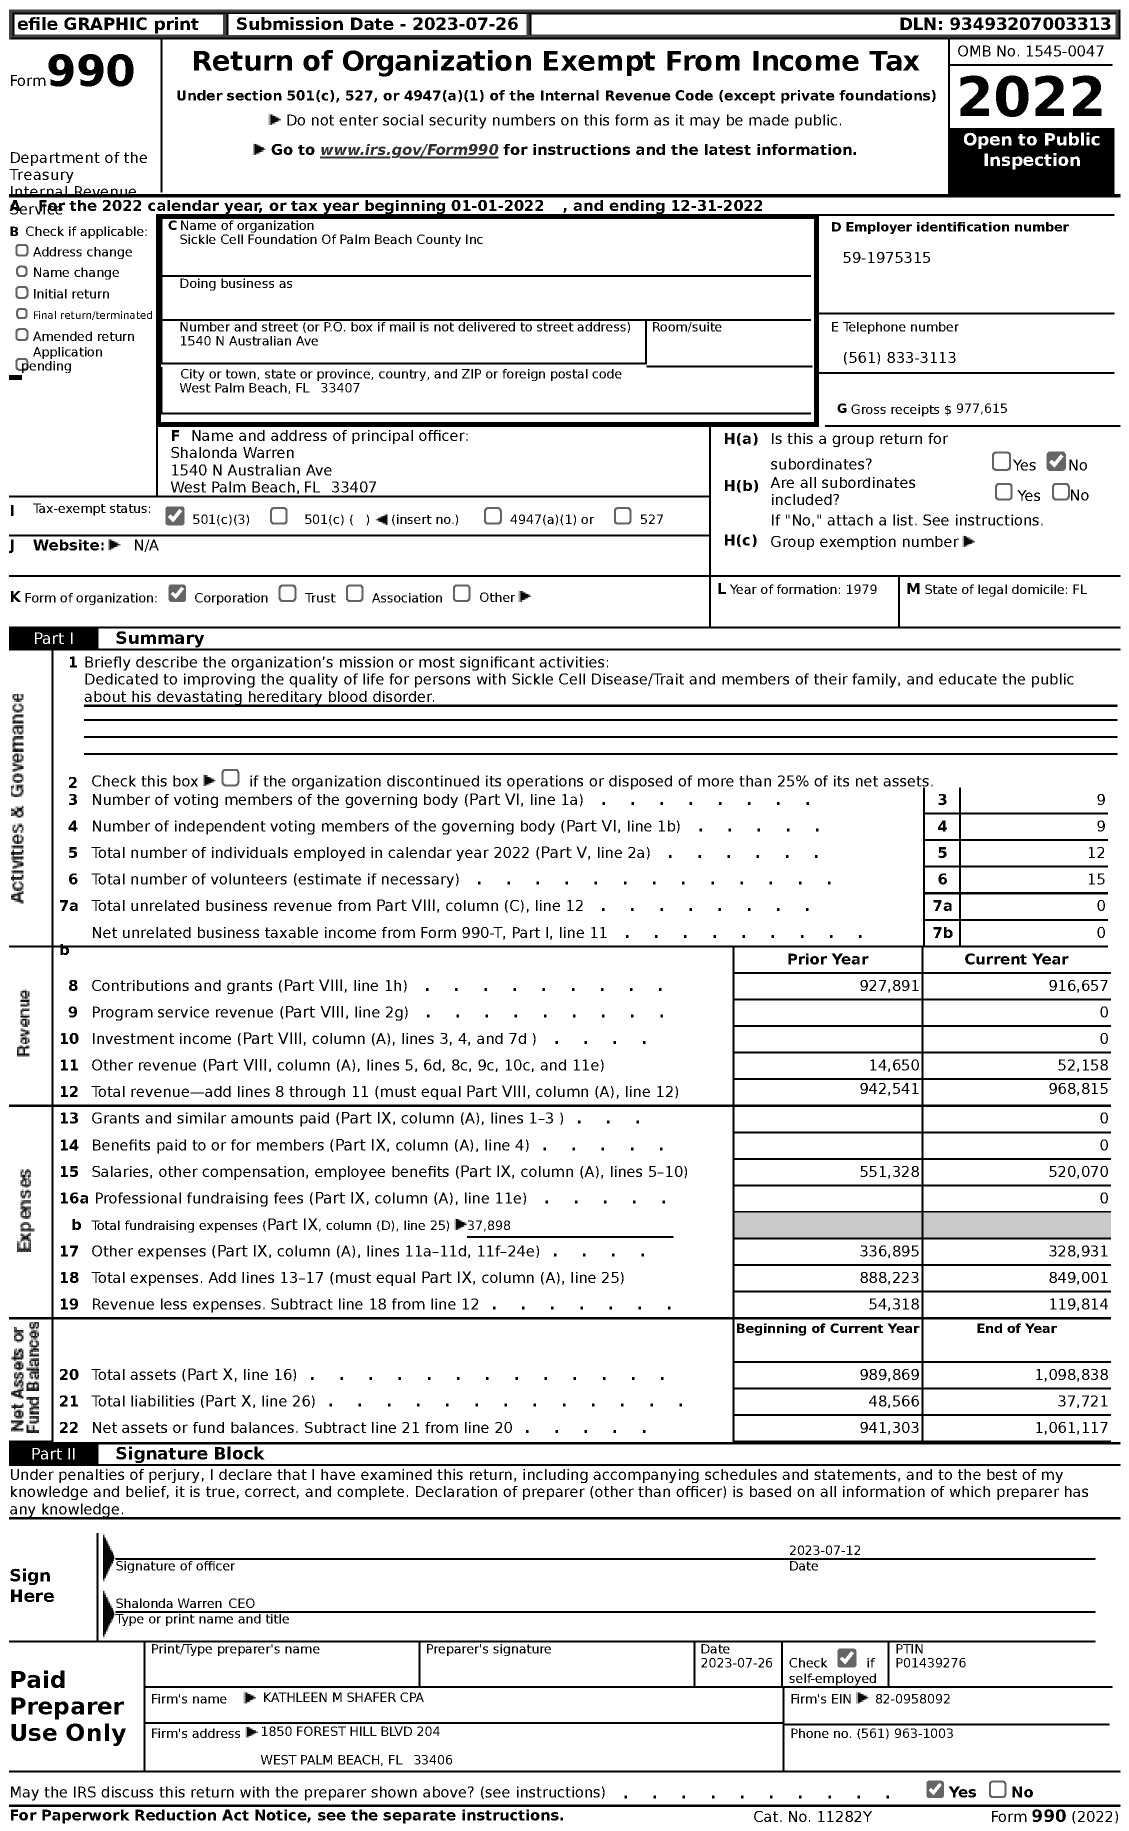 Image of first page of 2022 Form 990 for Sickle Cell Foundation of Palm Beach County and Treasure Coast (SCF)